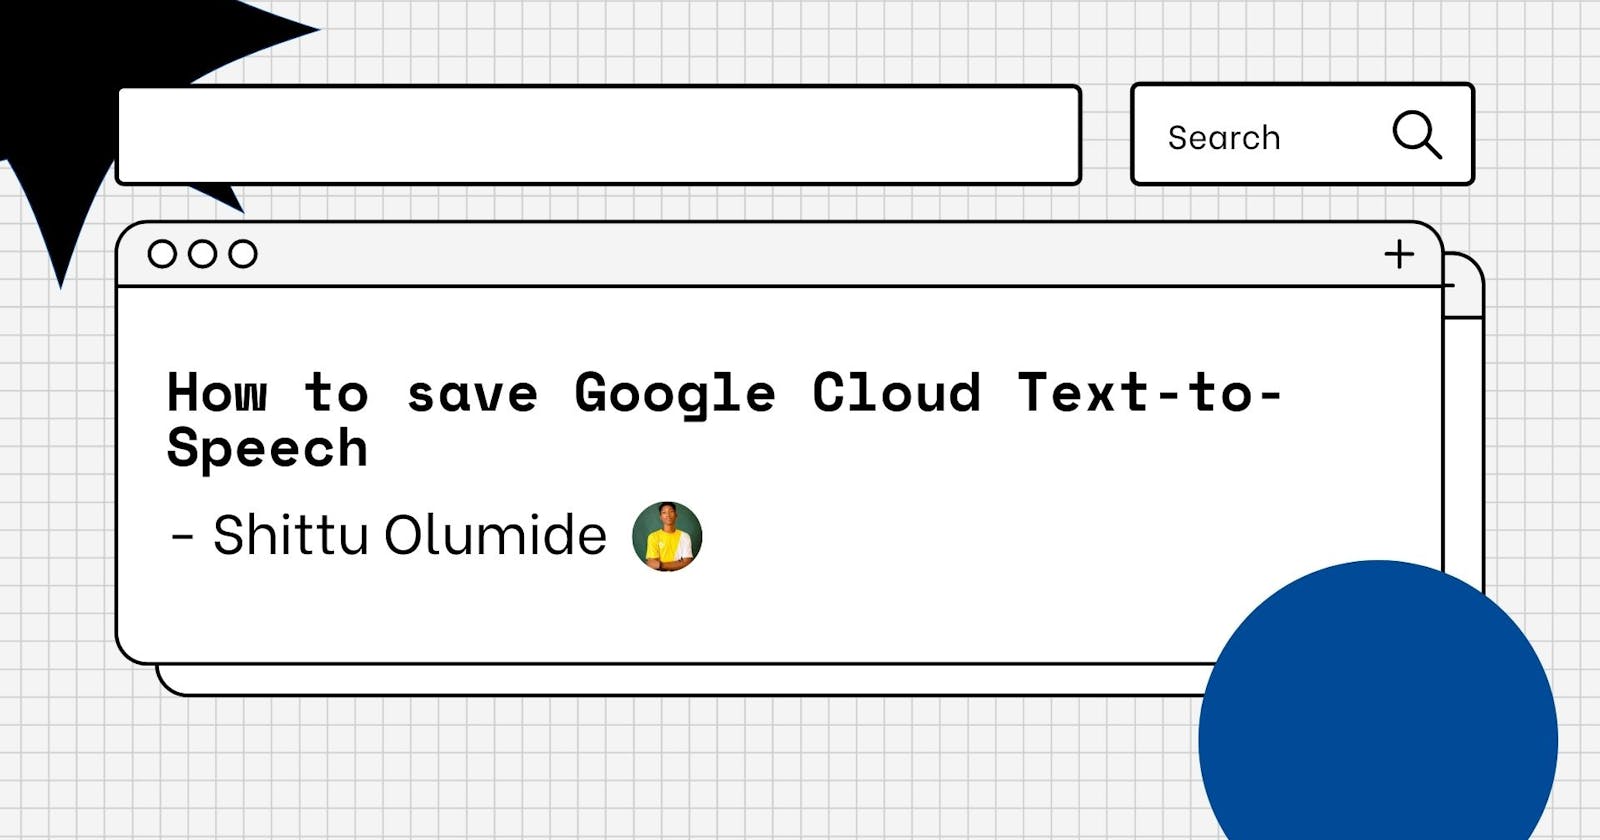 How to save Google Cloud Text-to-Speech